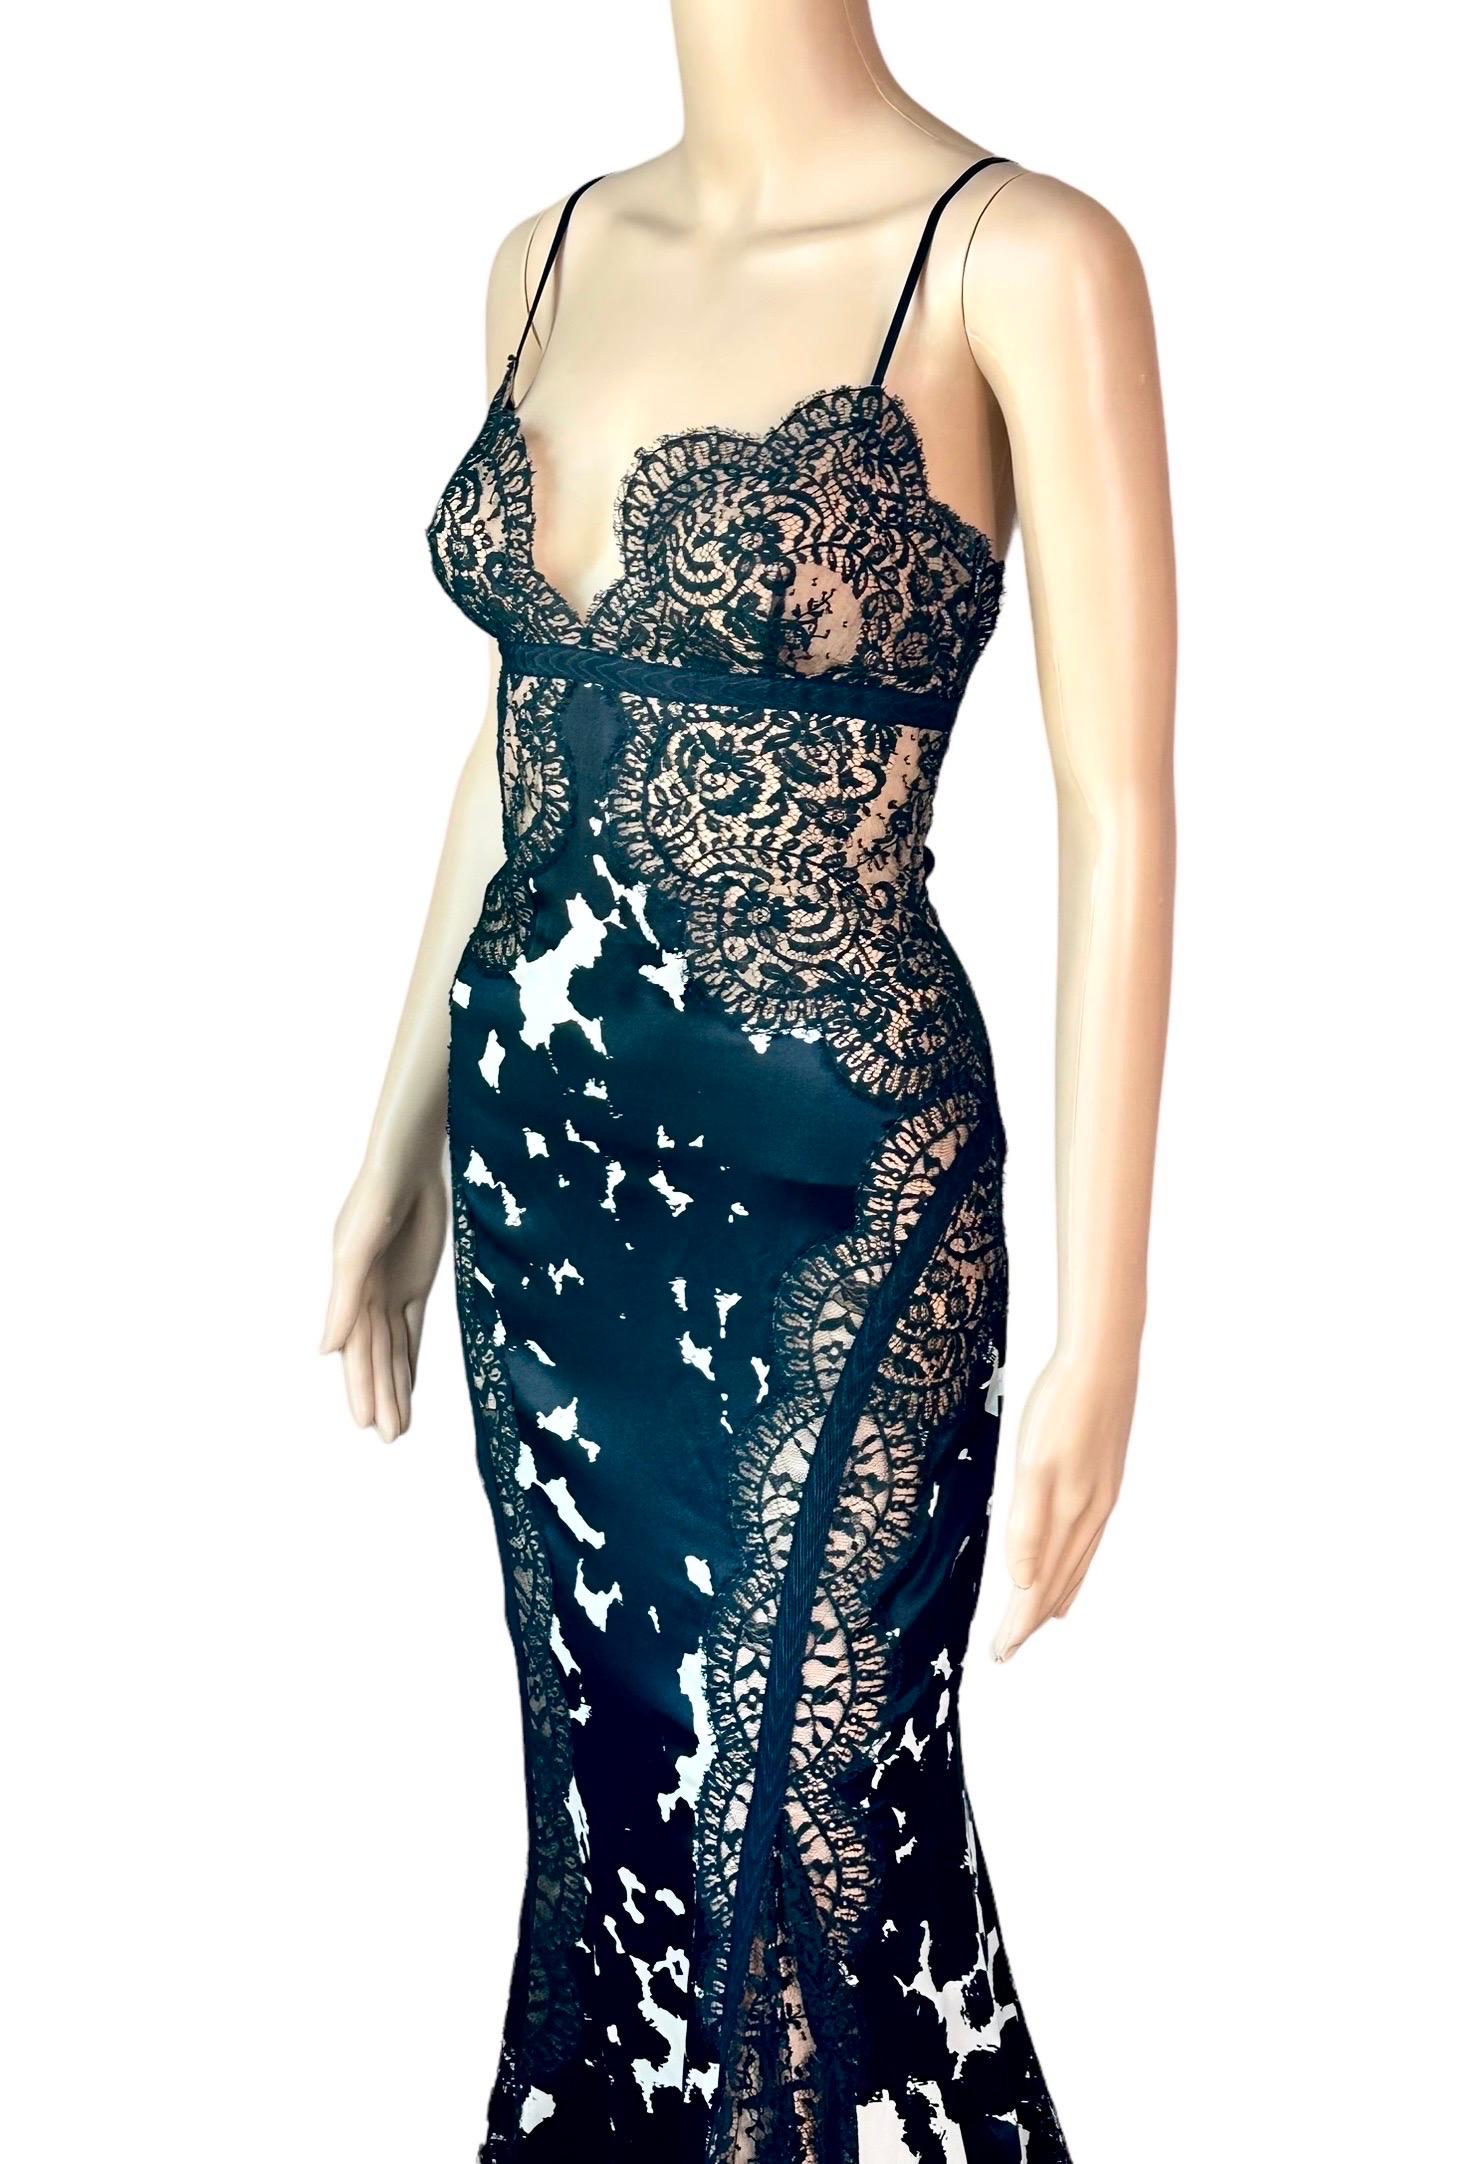 Versace Plunged Sheer Lace Panels Backless Train Evening Dress Gown  3